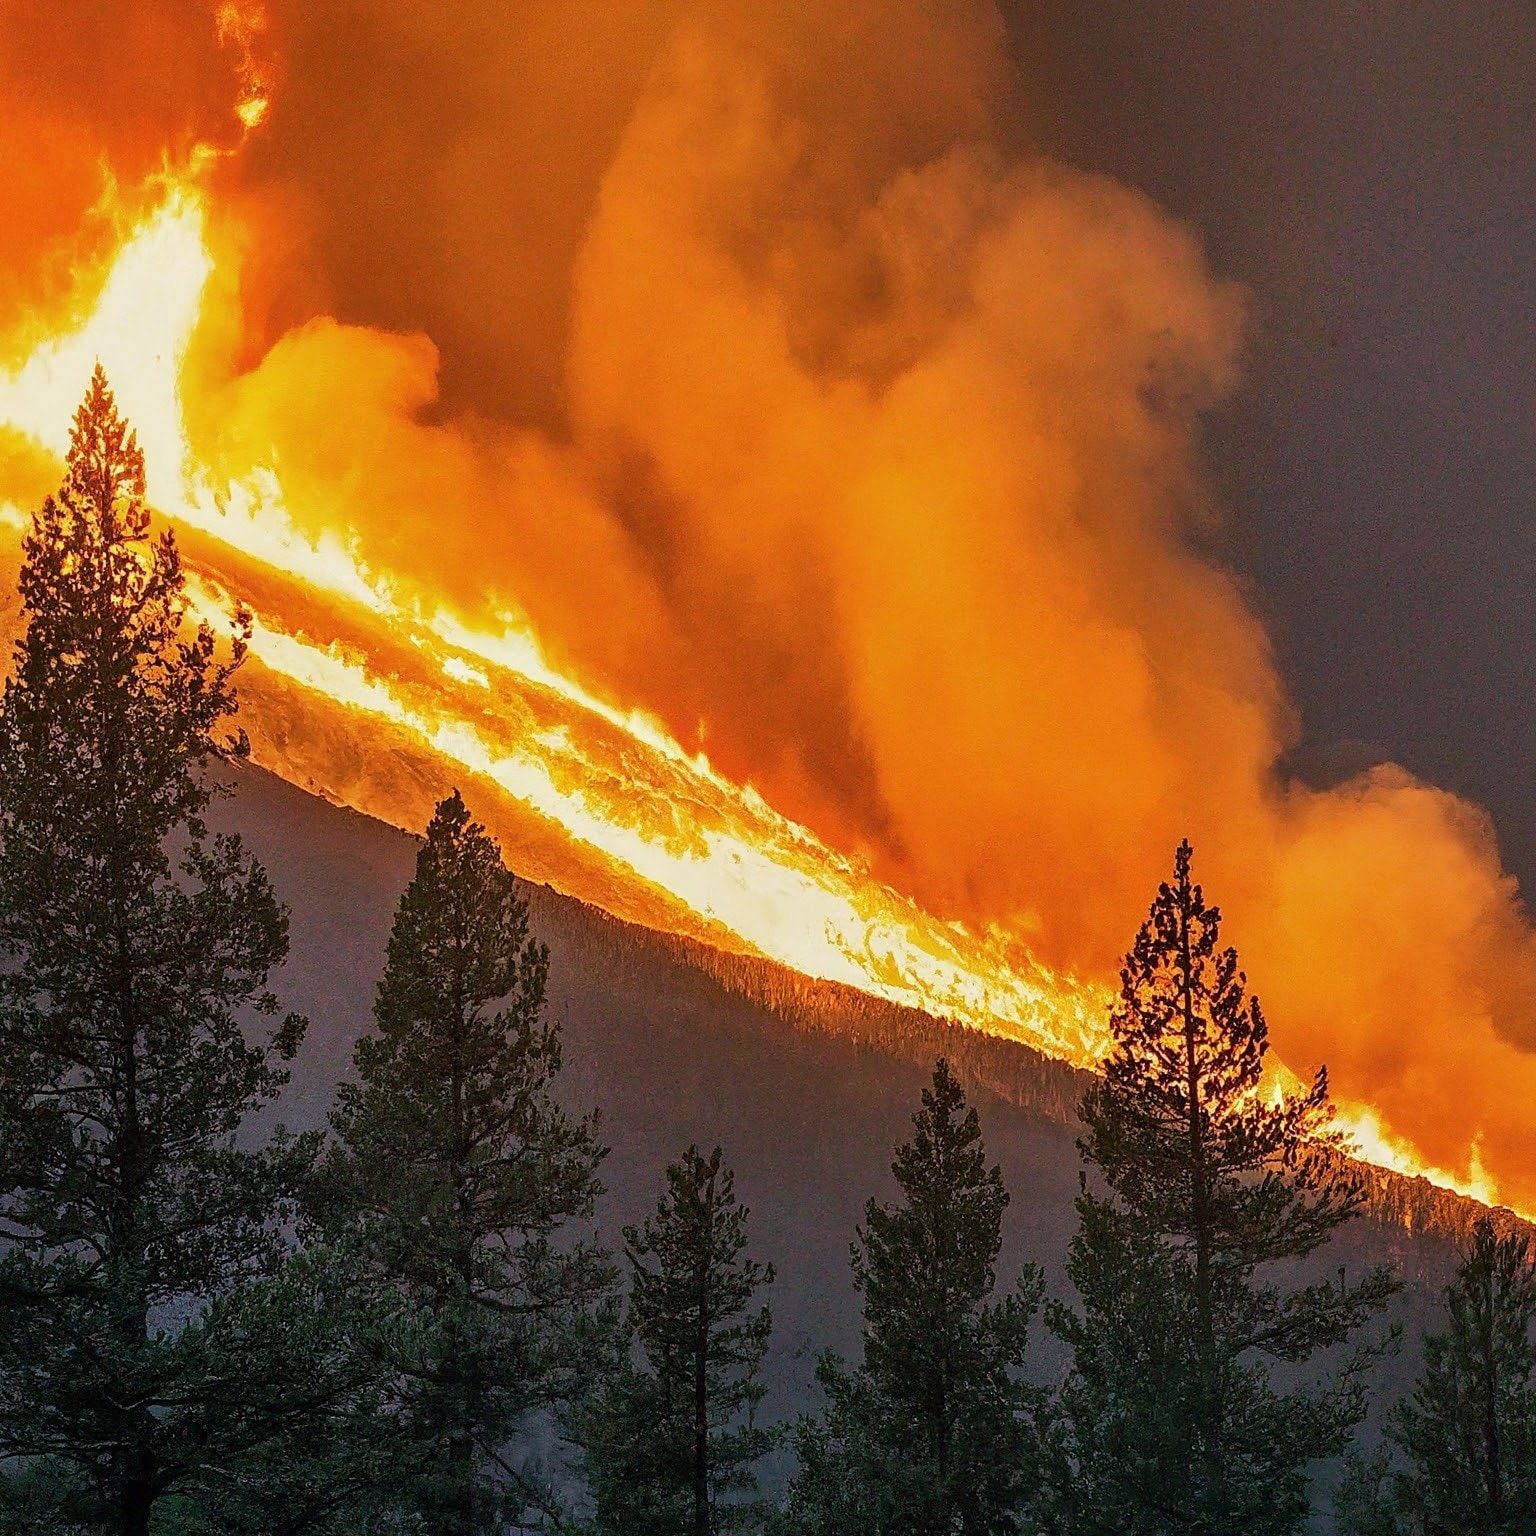 DEVELOPING: Oregon fire is the largest burning in the US. A storm with lightning and high winds exacerbates it